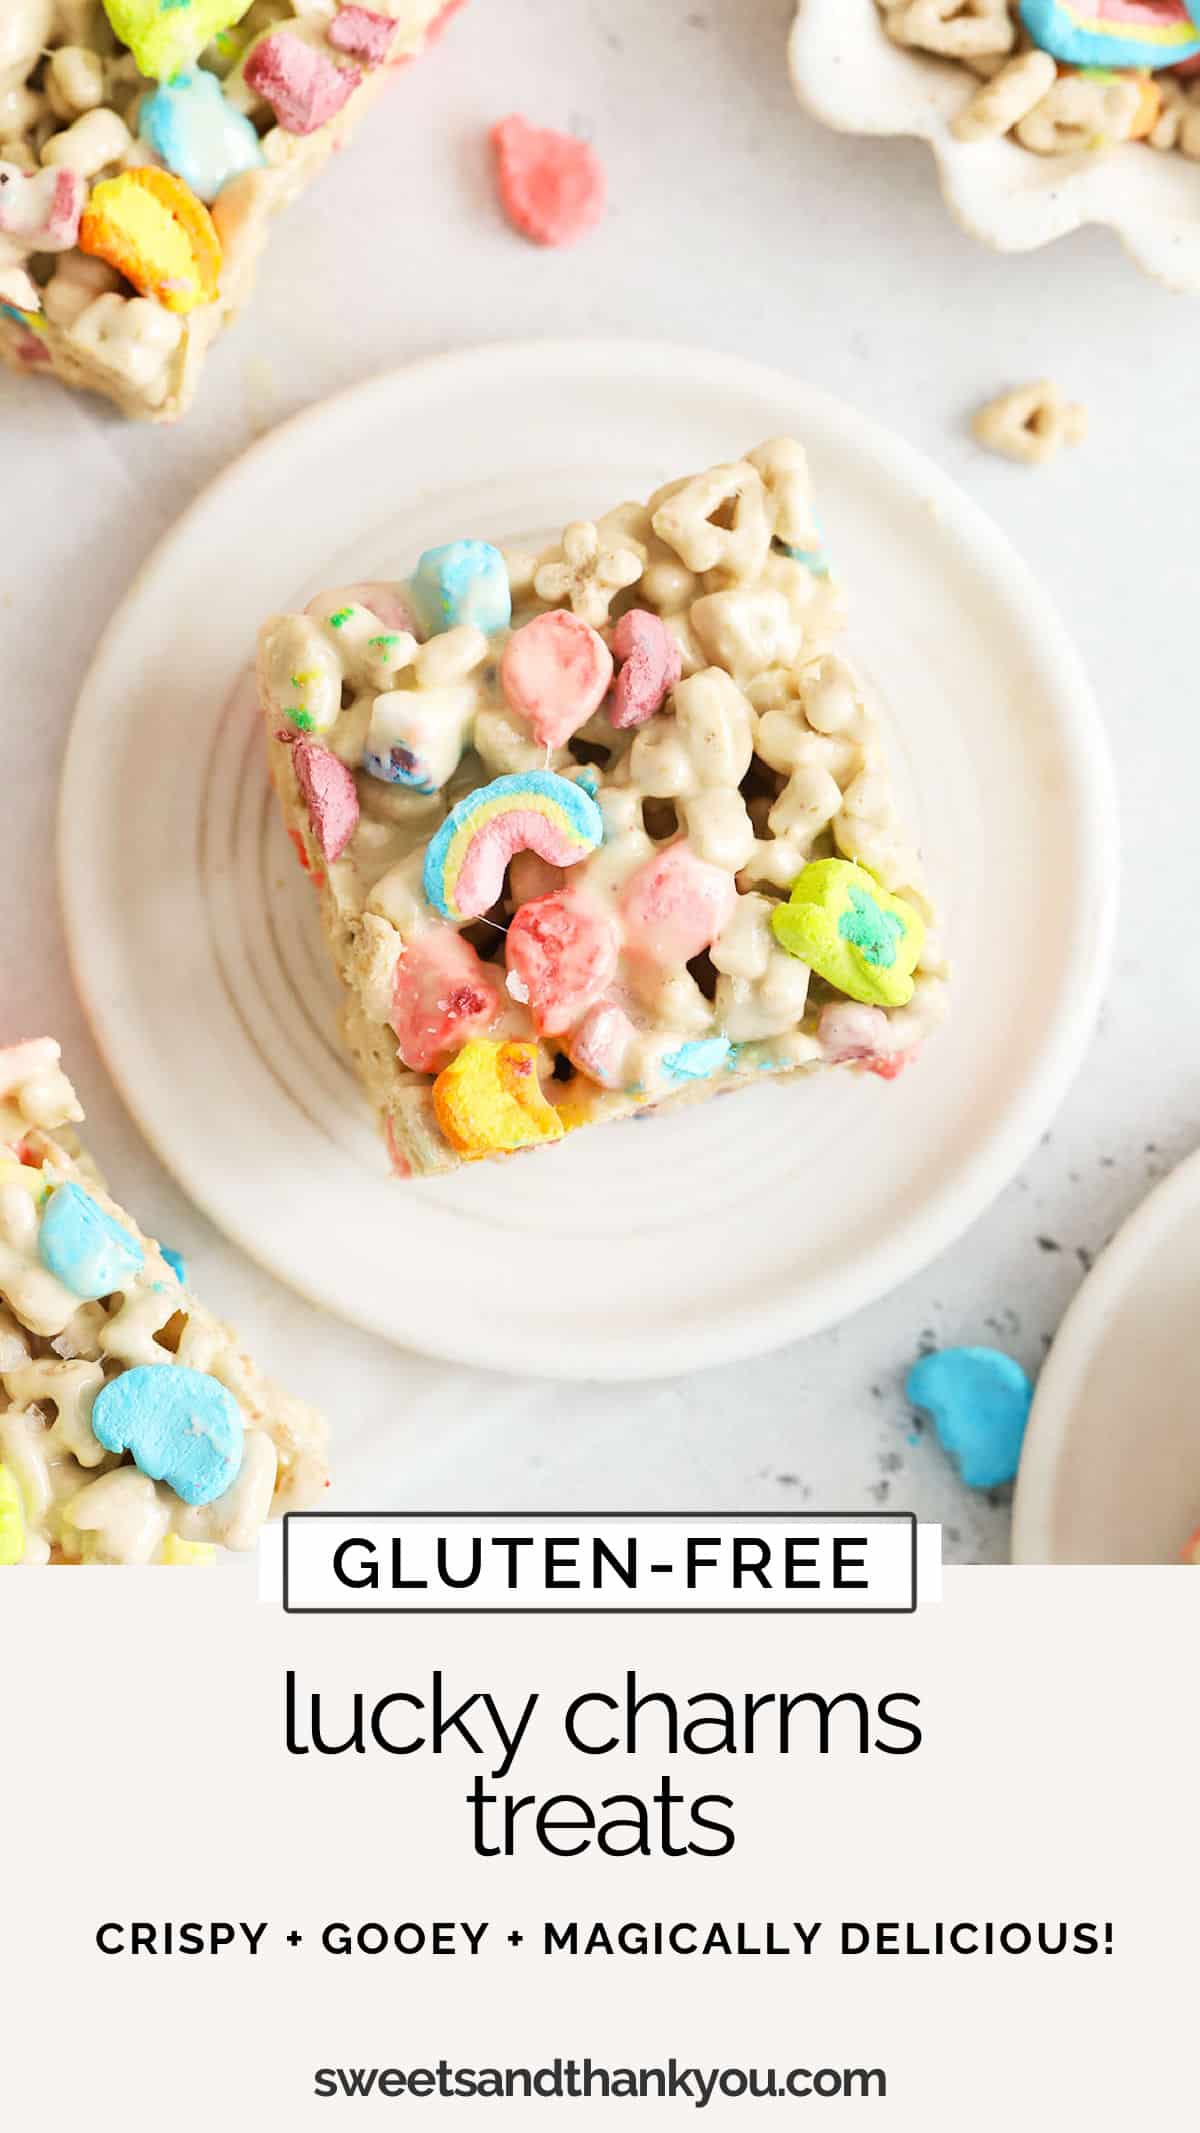 This Lucky Charms Treats recipe is a magically delicious St. Patrick's Day treat to share with your family! Quick, easy & no-bake, too! / lucky charms marshmallow treats / lucky charms cereal treats / lucky charms rice krispie treats / lucky charms rice crispy treats / lucky charms rice krispies treats / gluten-free st. patricks day dessert / St. Patrick's Day treats / rainbow dessert / gluten-free cereal treats / no bake recipe / gluten-free cereal bars / lucky charms cereal bars /